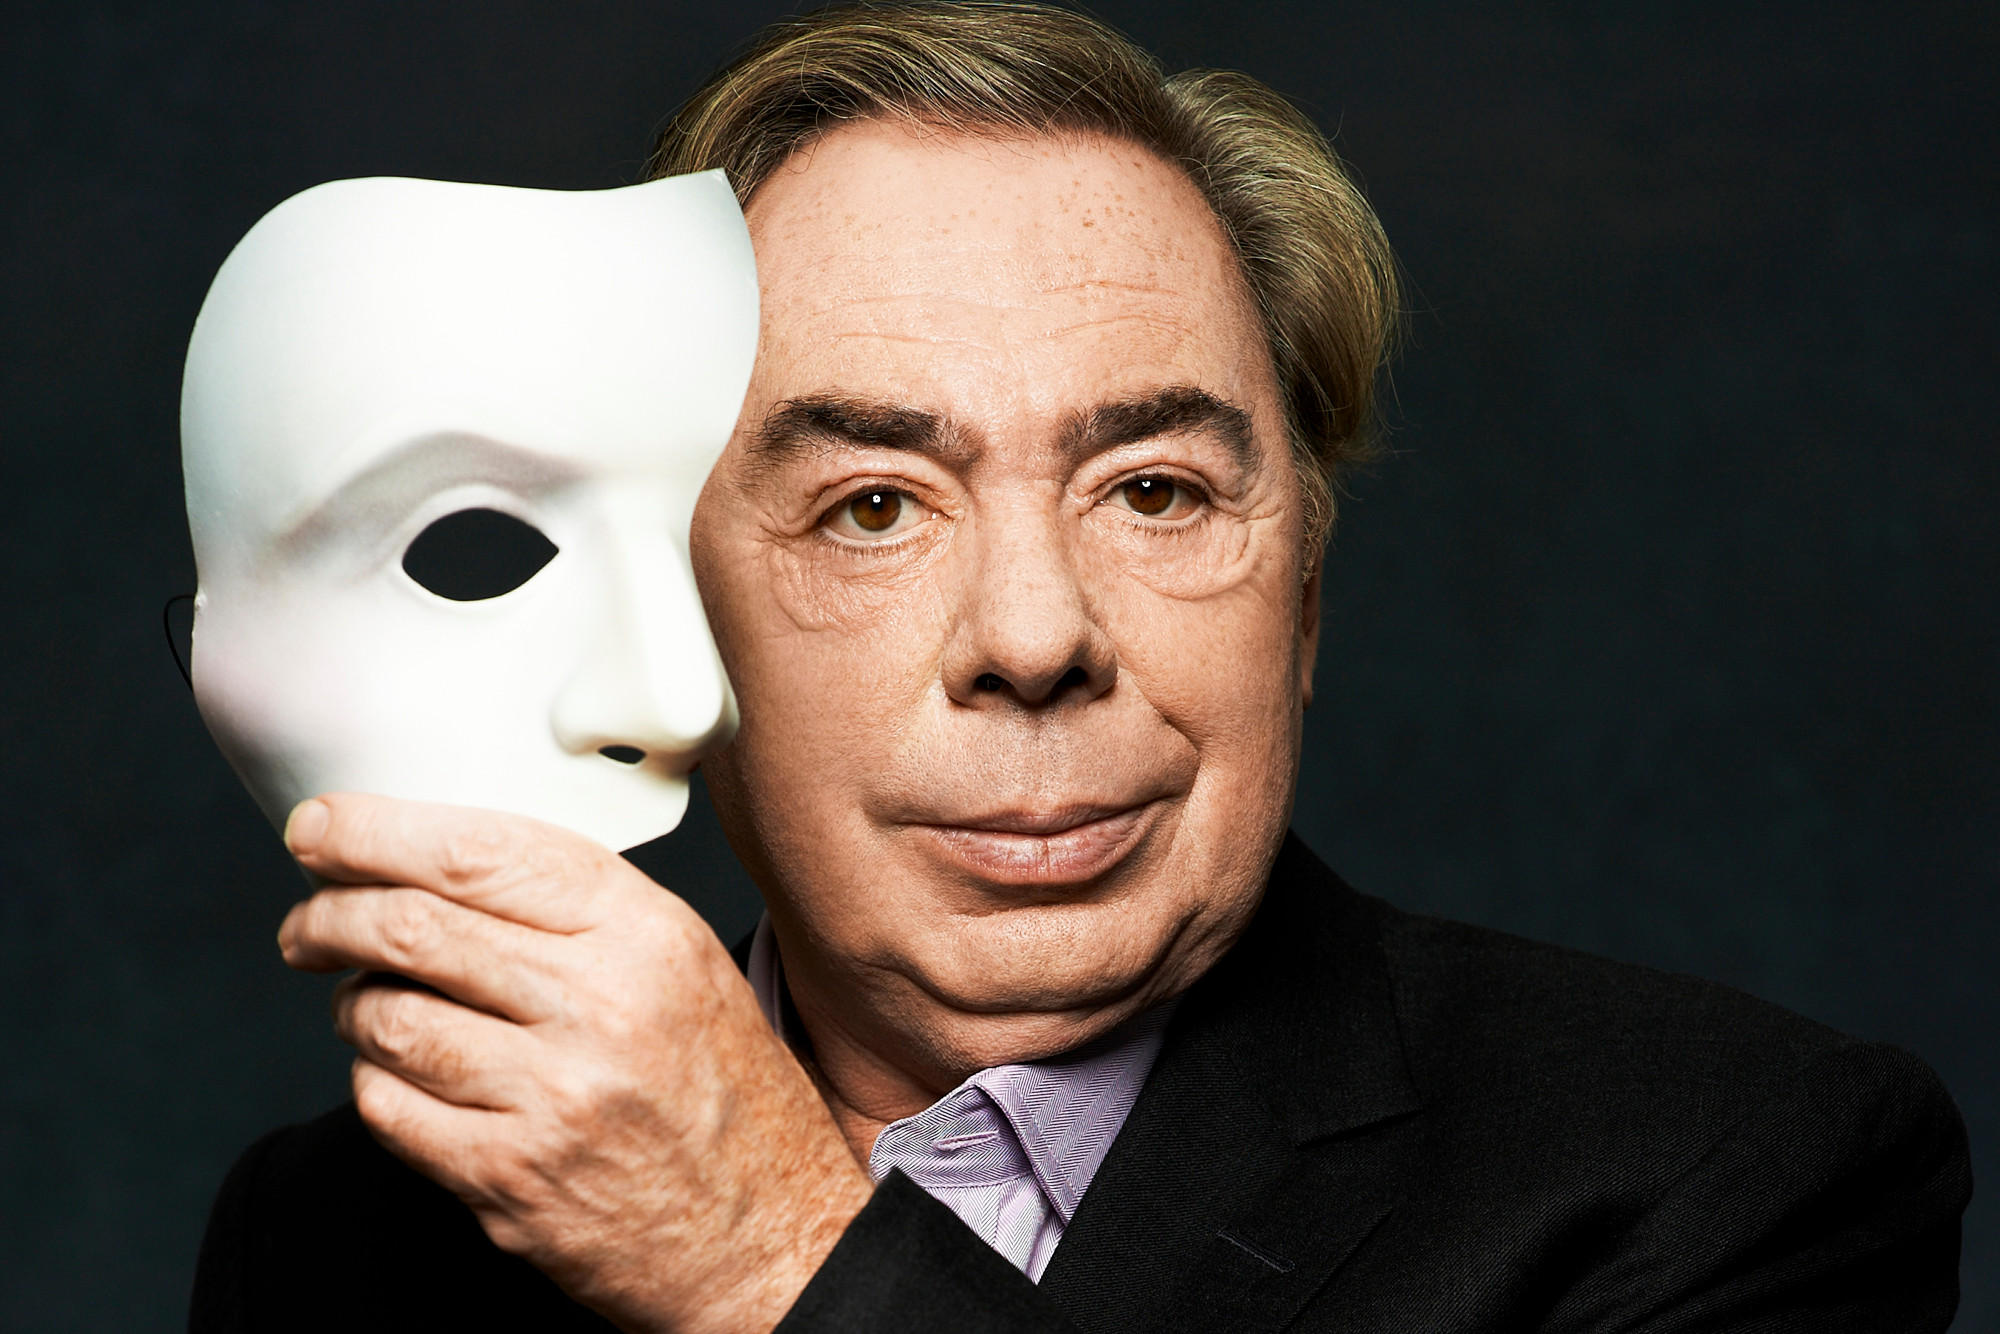 On Stage: Andrew Lloyd Webber, The Andrews Brothers, and Sherlock